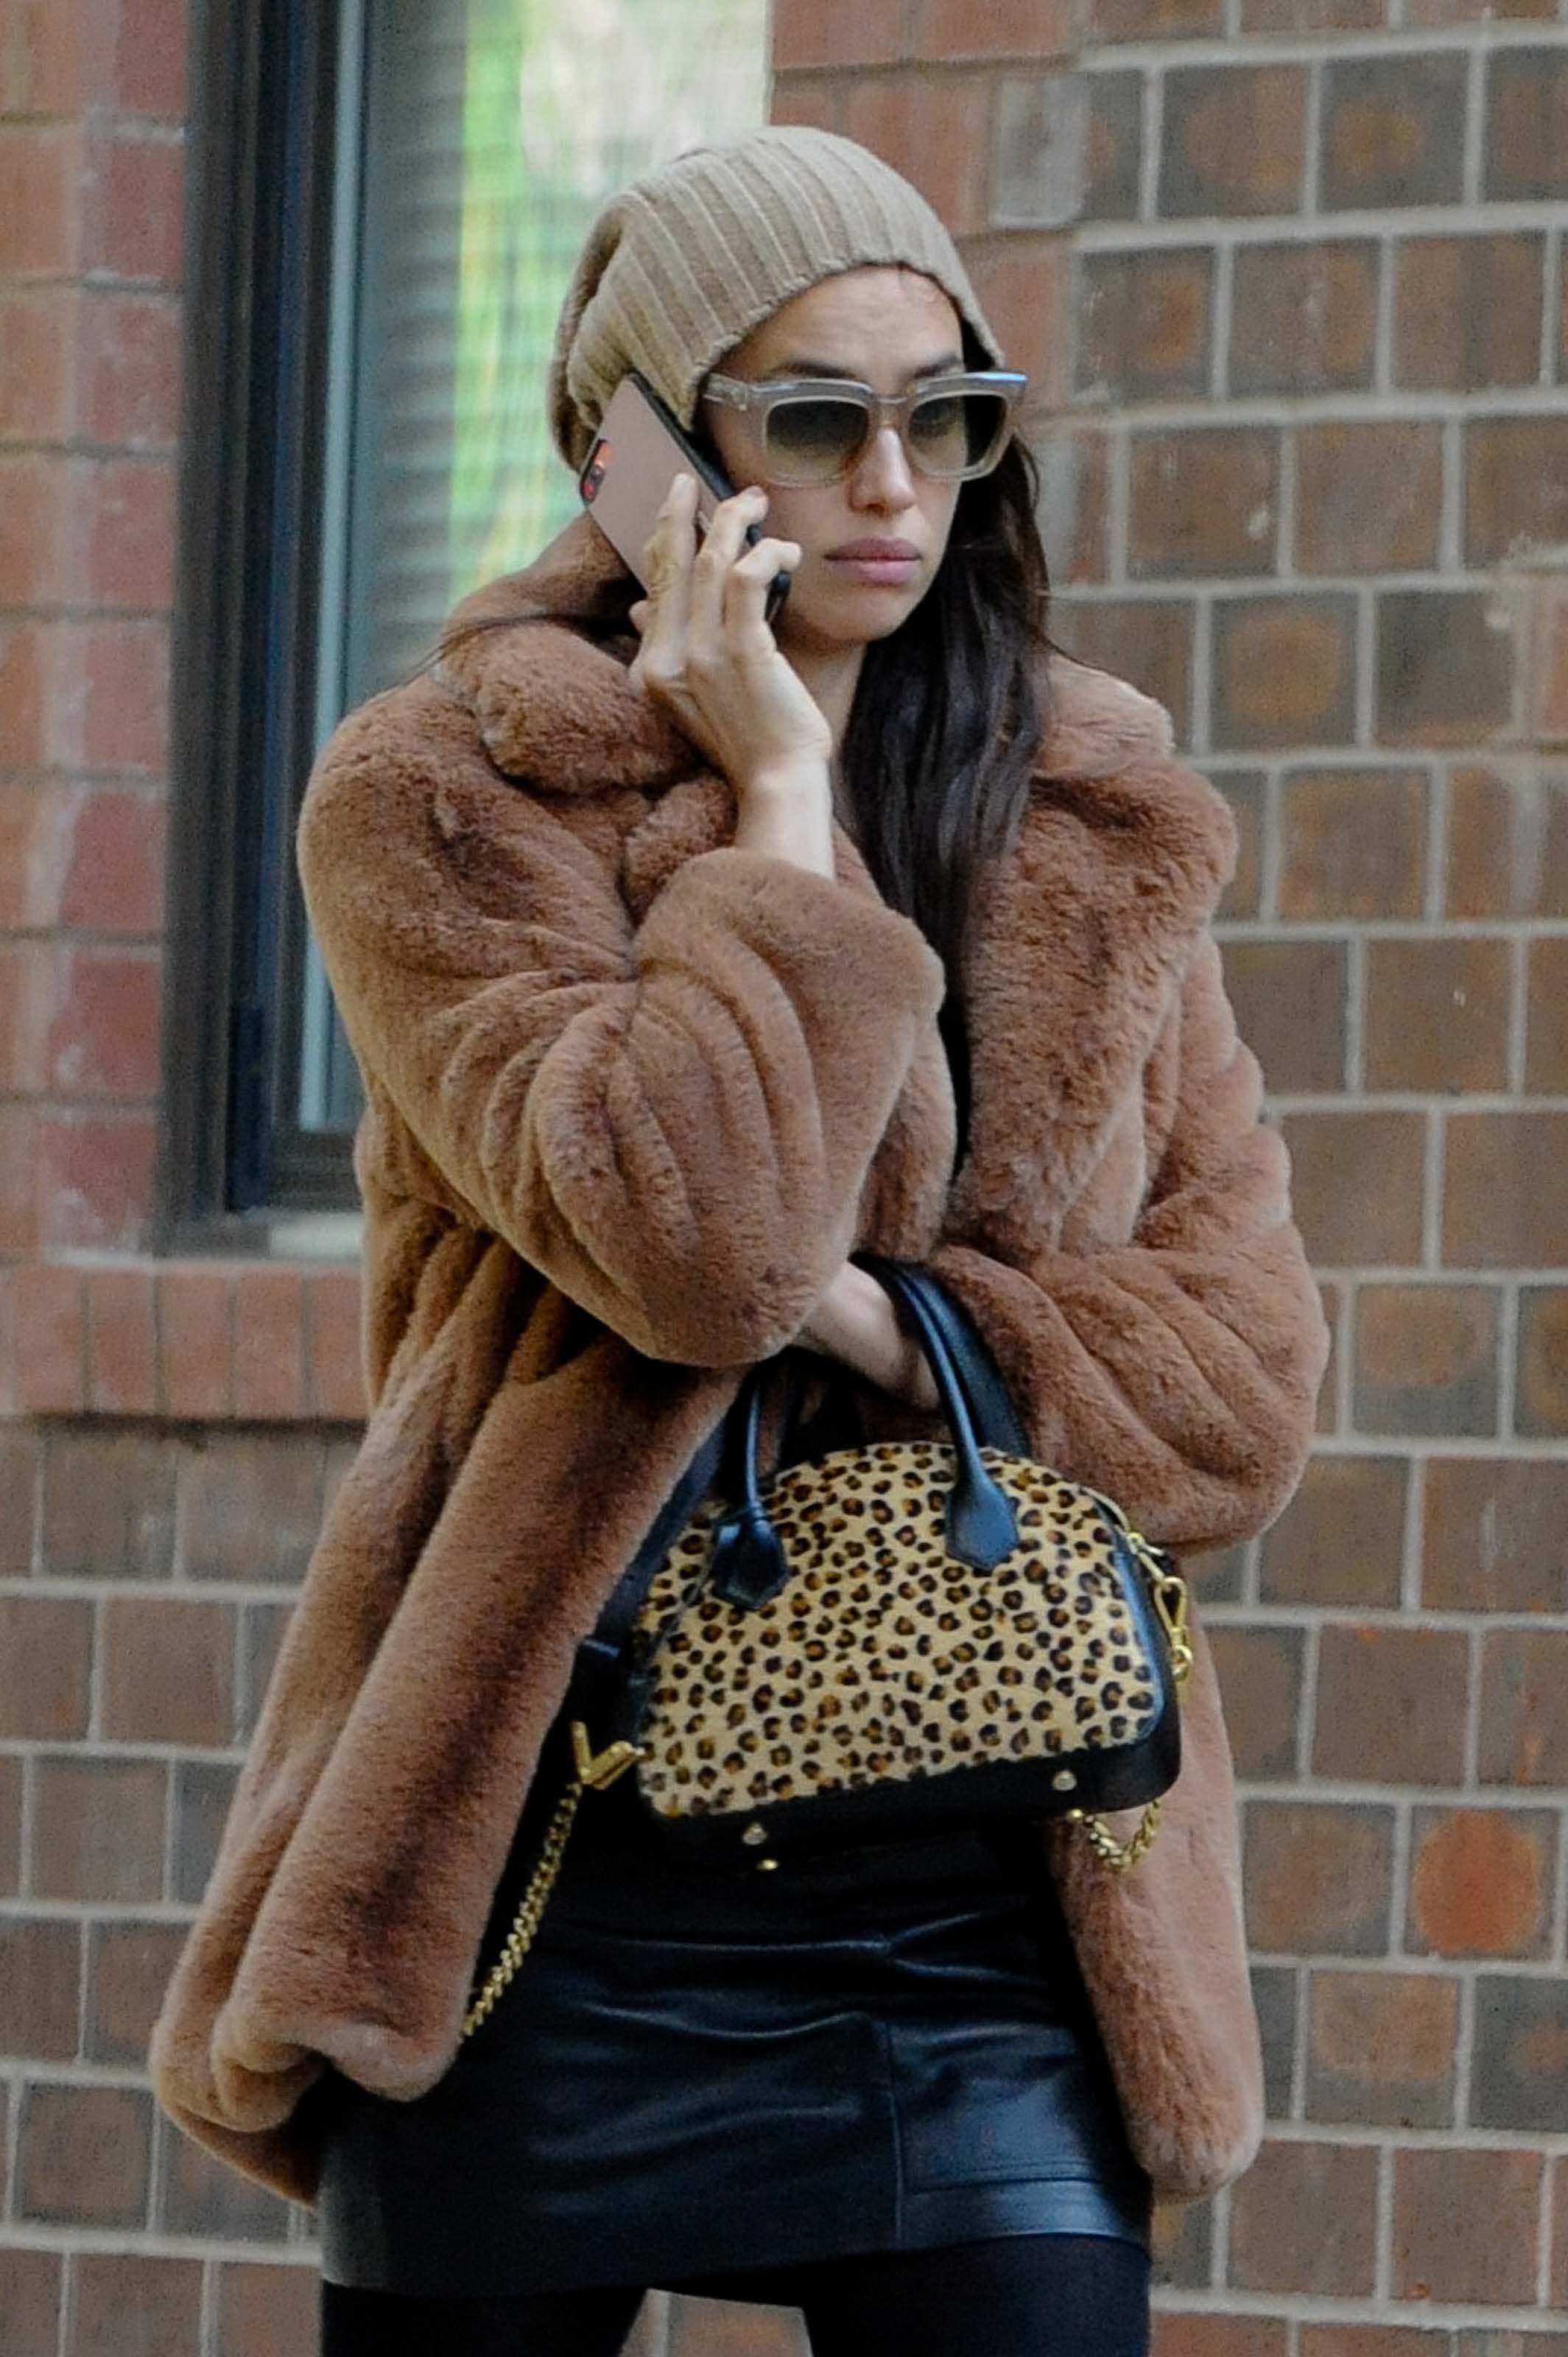 Irina Shayk out and about in NYC